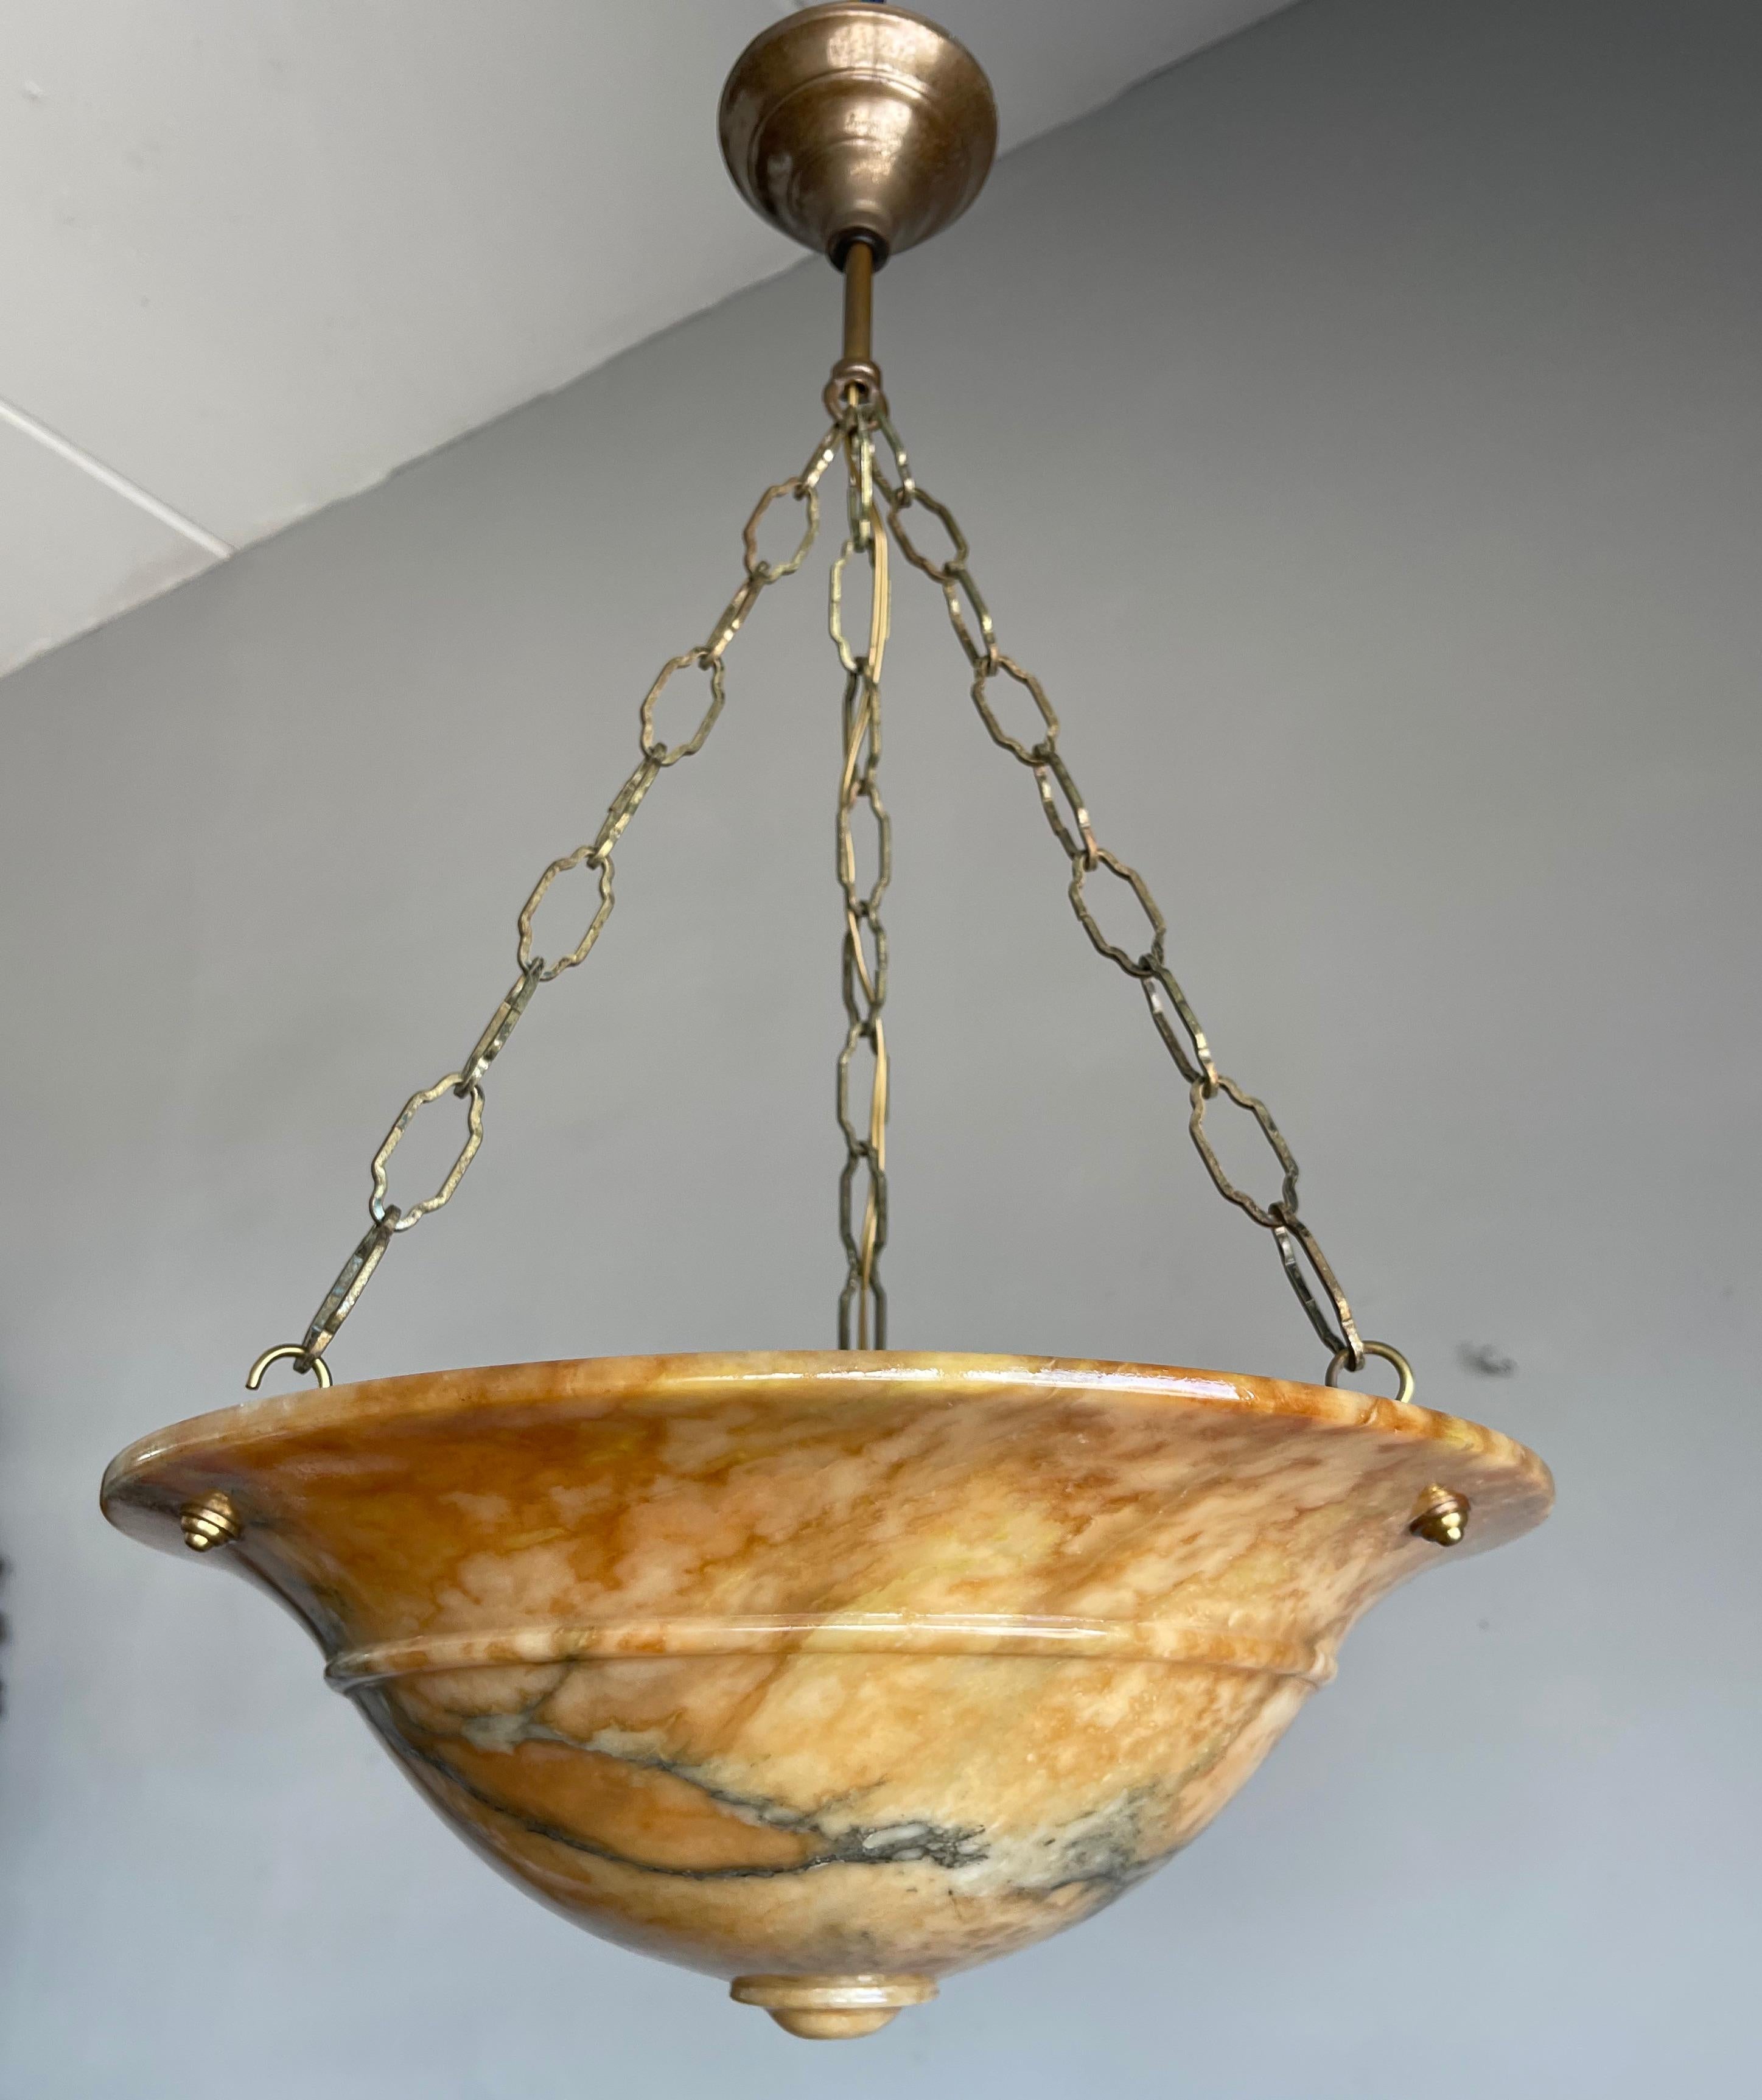 Beautiful colors with flowing black veins alabaster light fixture. 

If you are looking for a good quality and striking pendant to grace your interior then this early 20th century specimen could be perfect for you. It is all handcrafted, practical